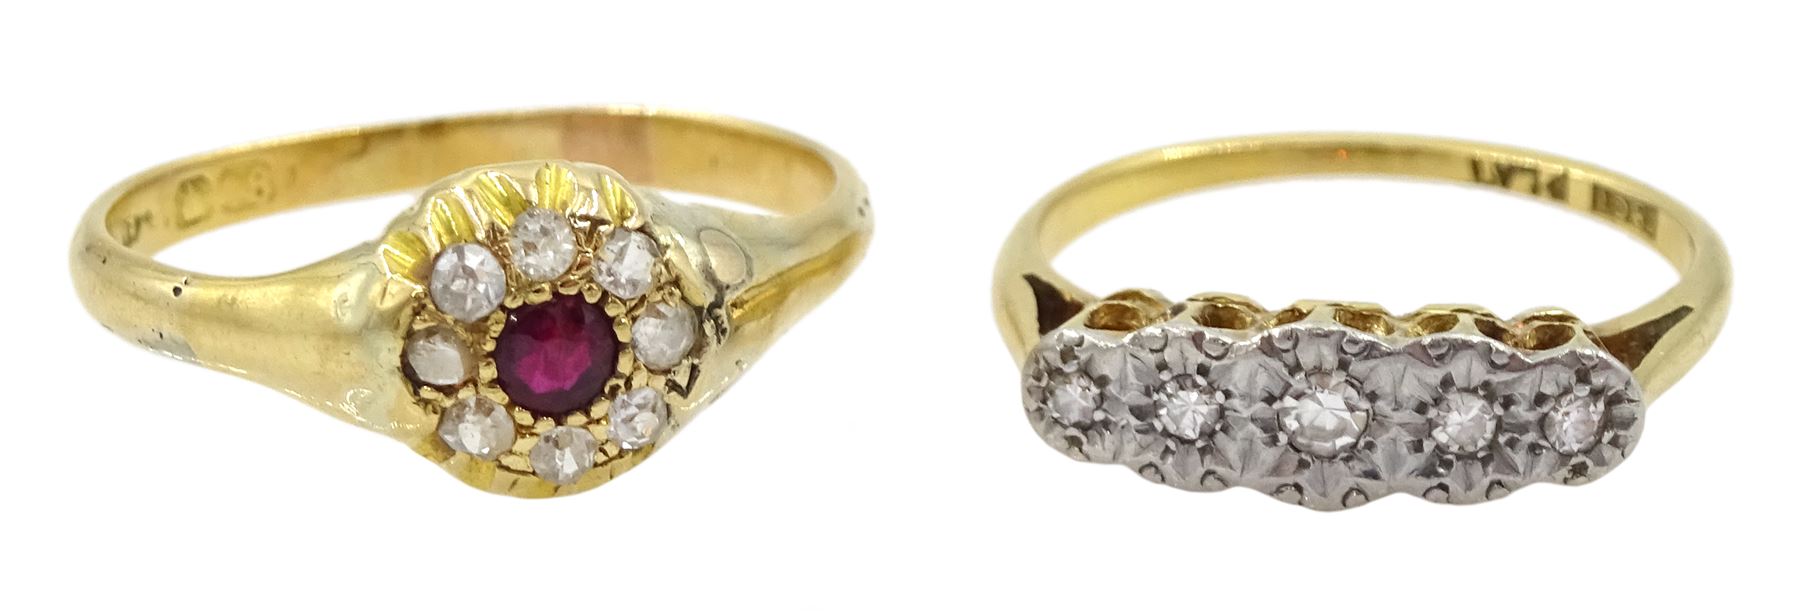 Early 20th century gold ruby and old cut diamond cluster ring and a gold five stone diamond ring